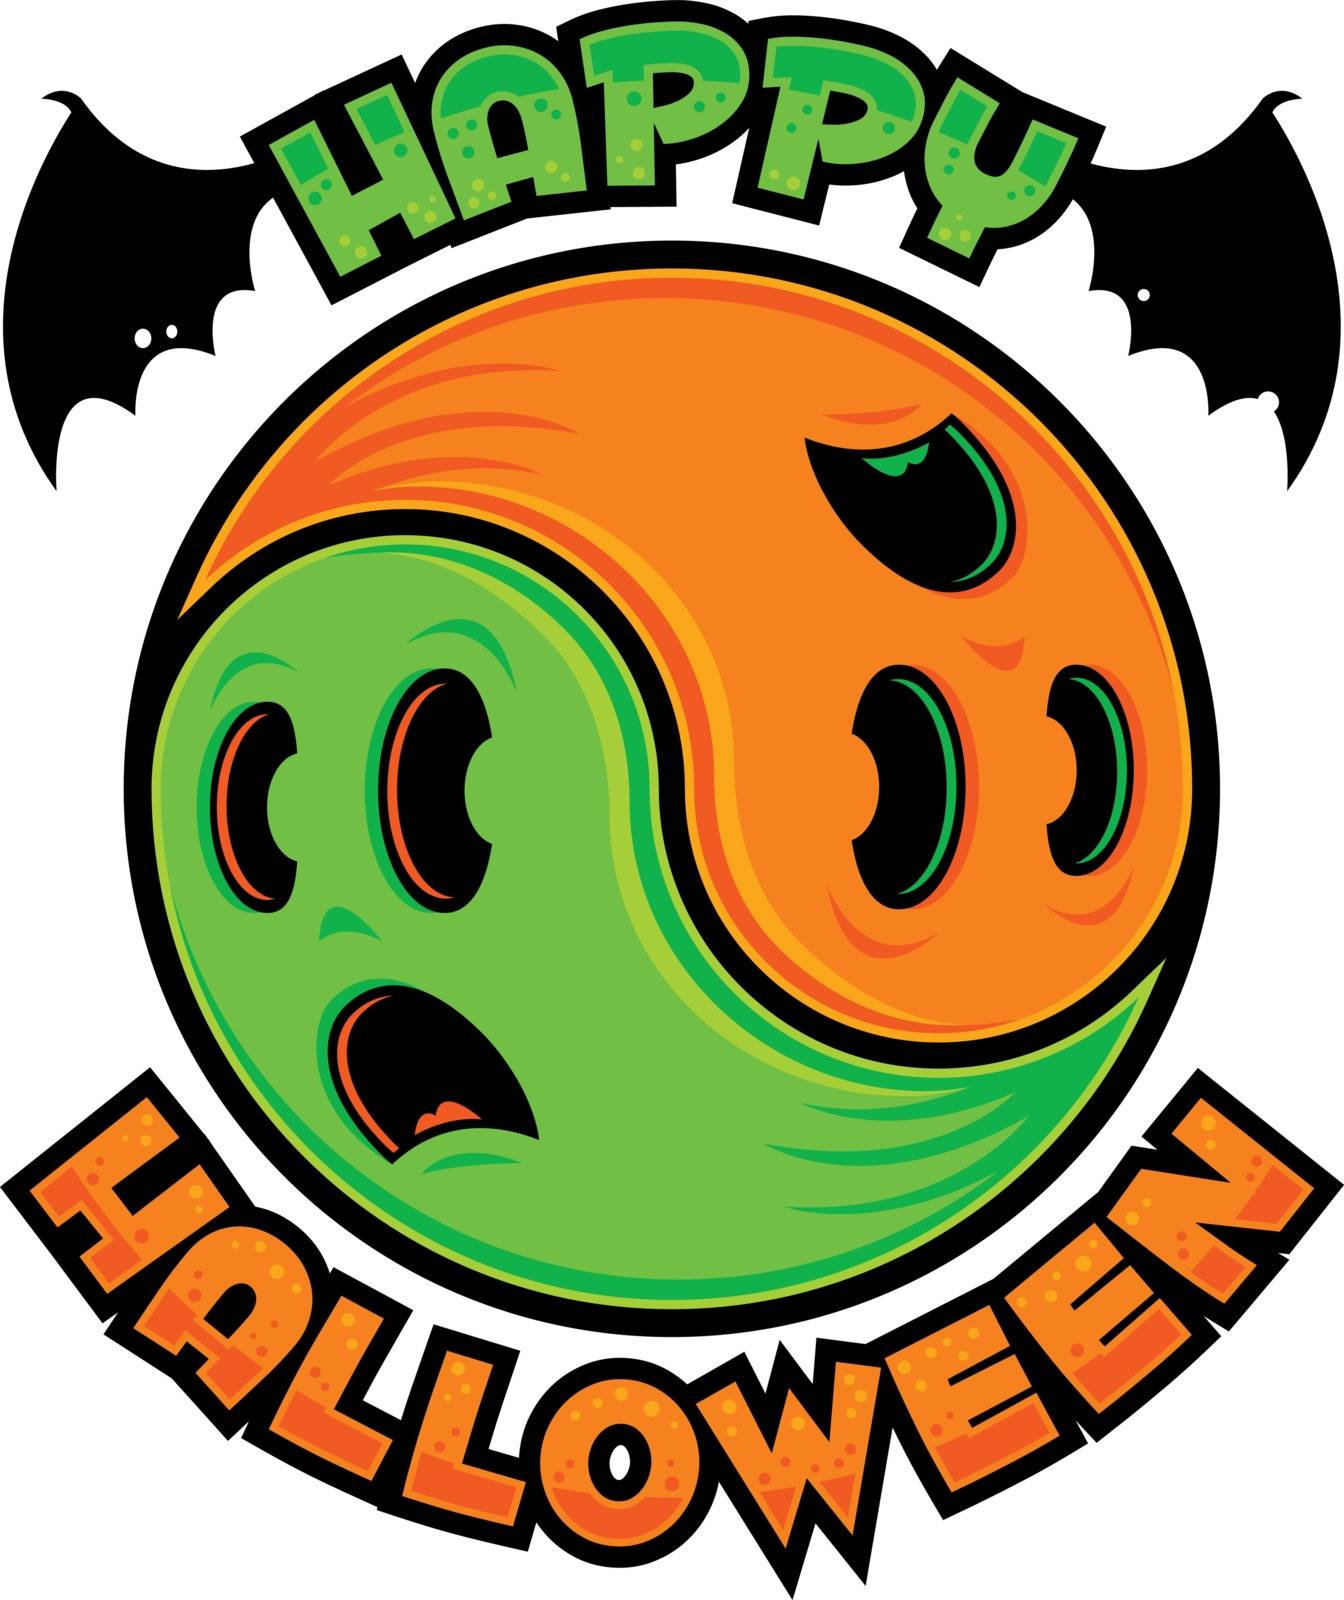 Yin-Yang symbol made from two spooky scared ghosts in green and orange with Happy Halloween text.